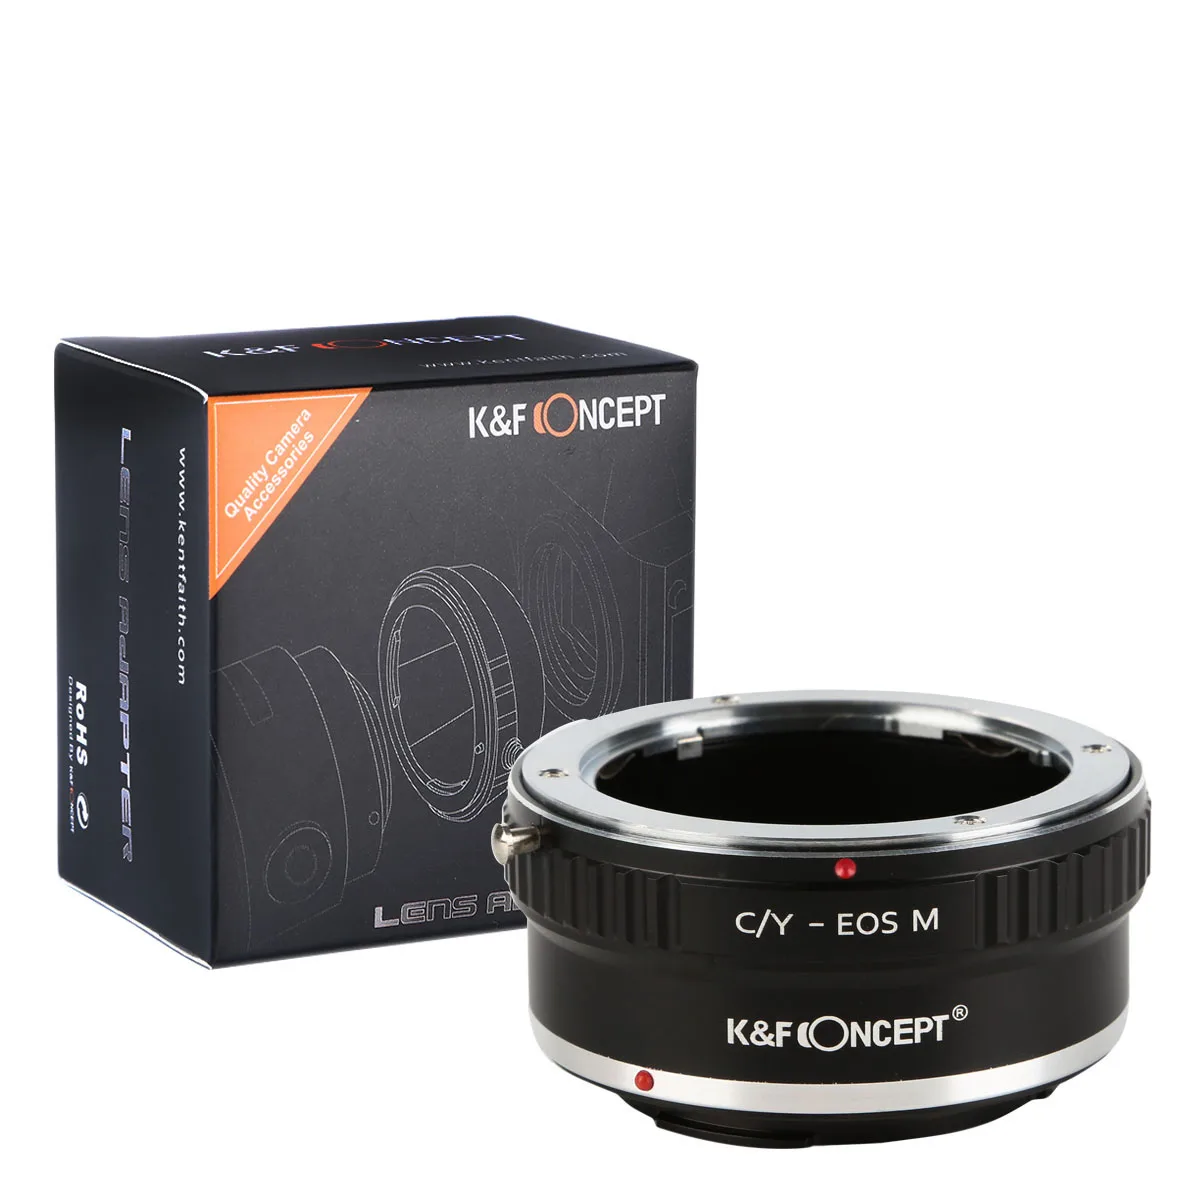 

K&F Concept Lens Adapter for Contax Yashica mount lens to Canon EOS M camera M1 M2 M3 M5 M6 M50 M100